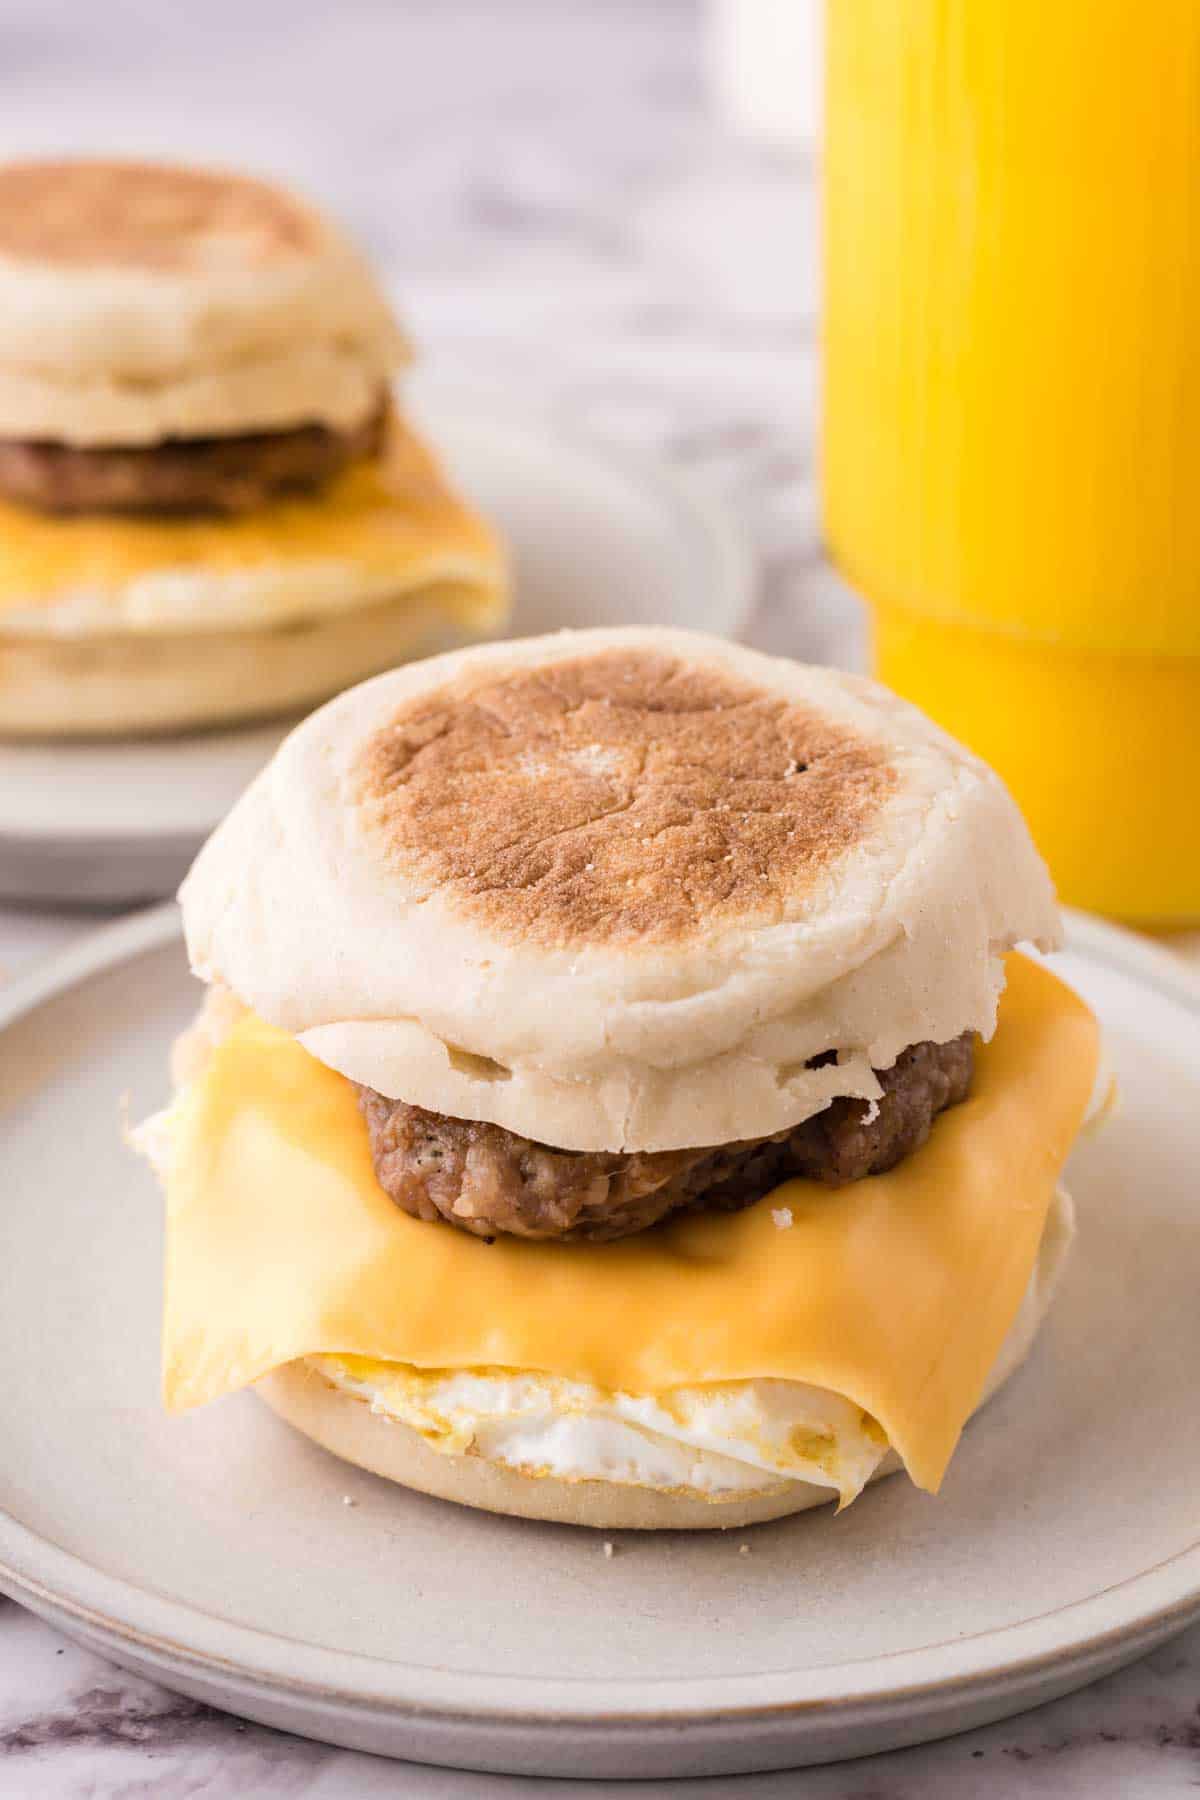 English muffin egg and sausage breakfast sandwich.